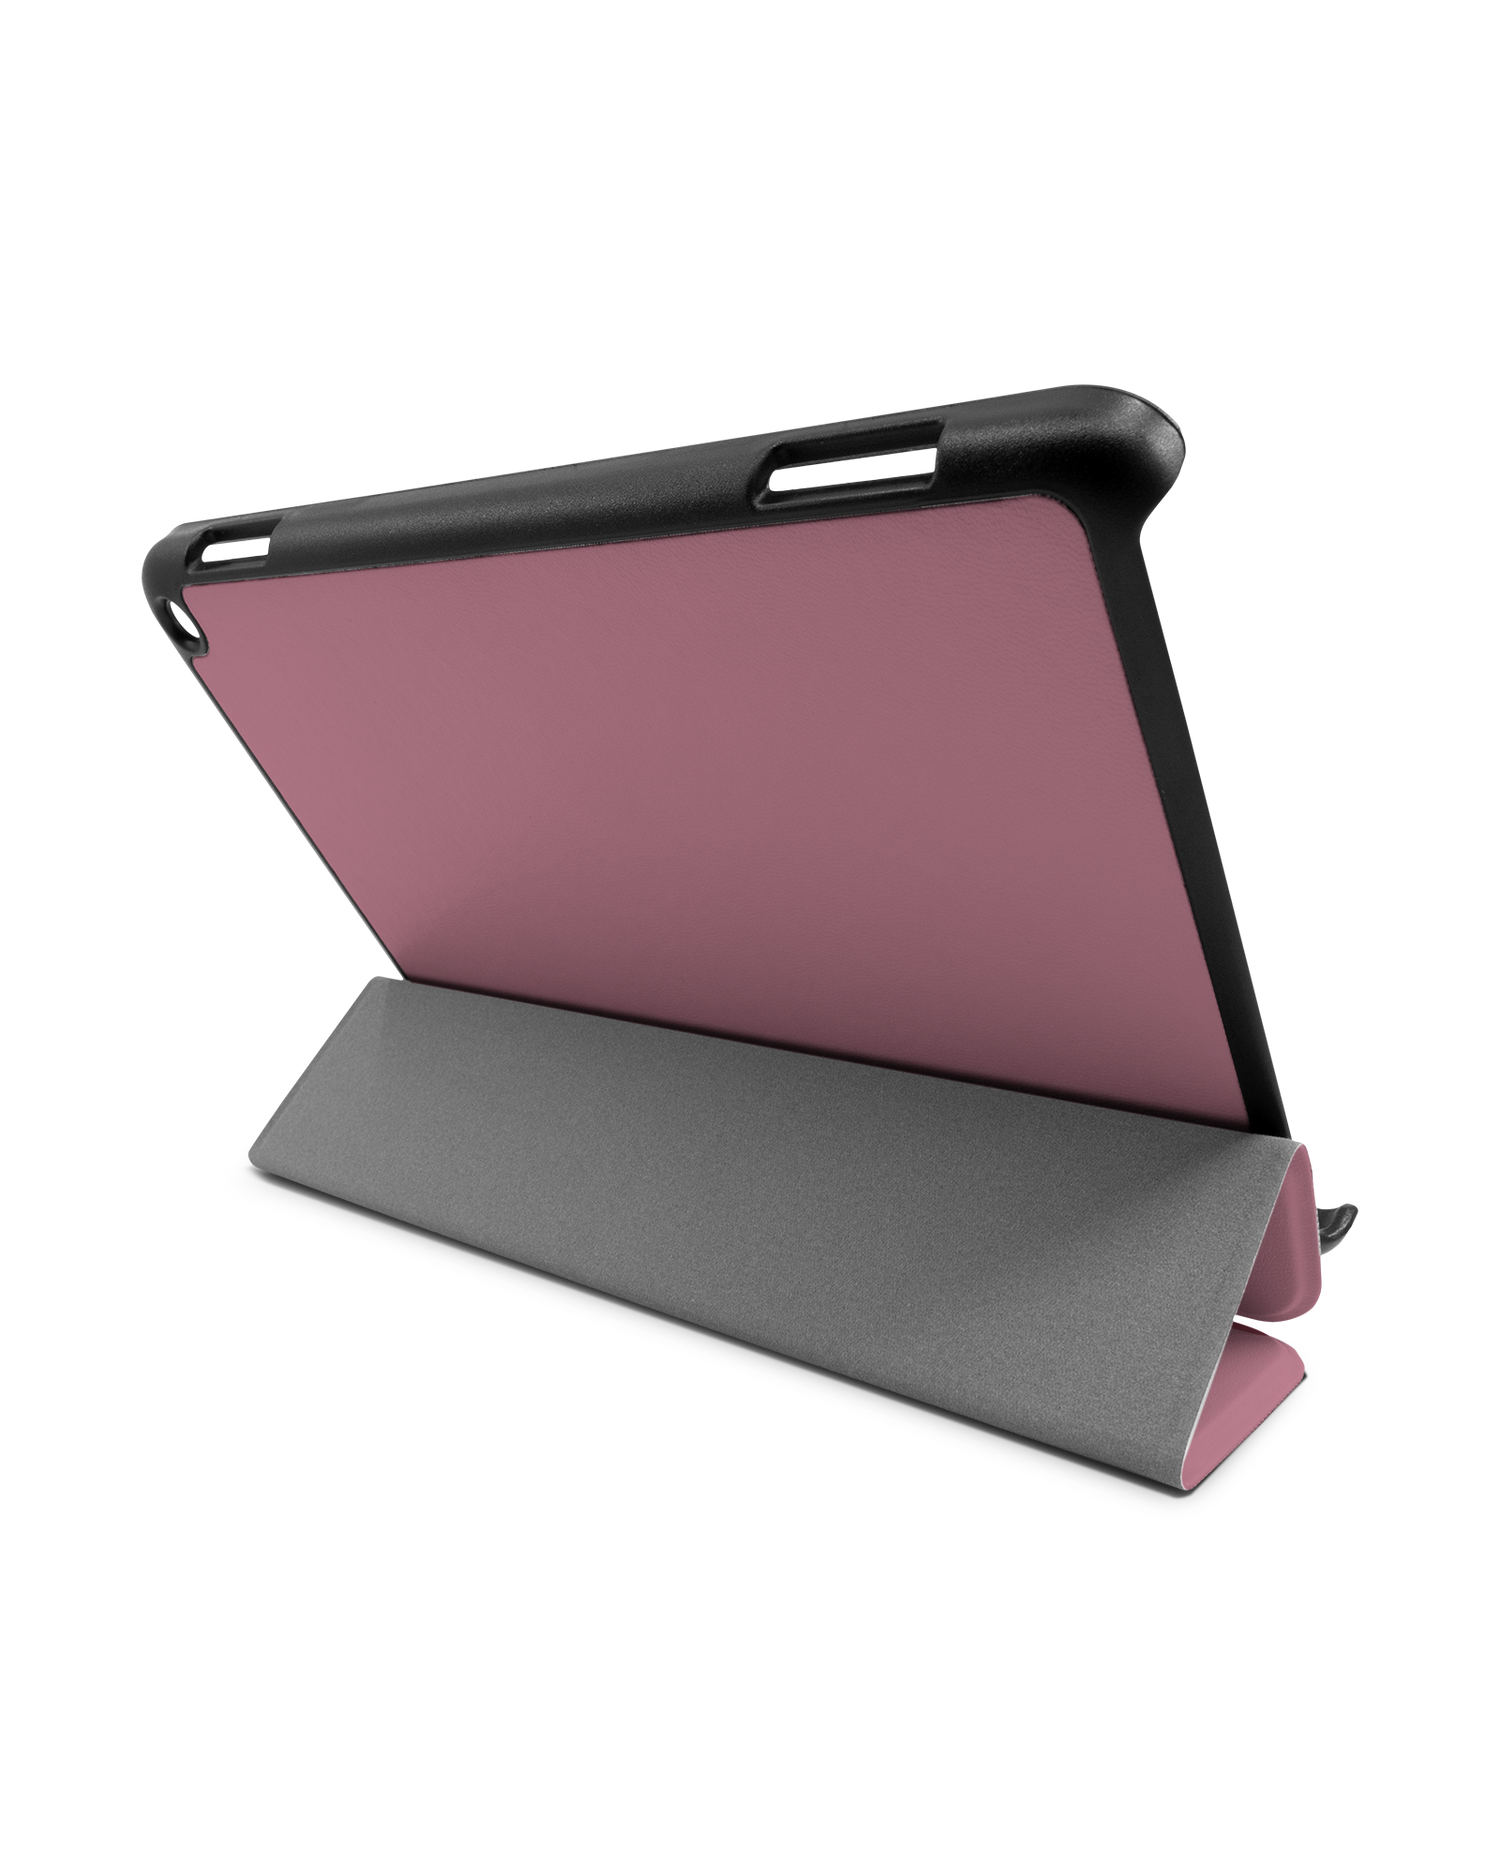 WILD ROSE Tablet Smart Case for Amazon Fire HD 8 (2022), Amazon Fire HD 8 Plus (2022), Amazon Fire HD 8 (2020), Amazon Fire HD 8 Plus (2020): Used as Stand